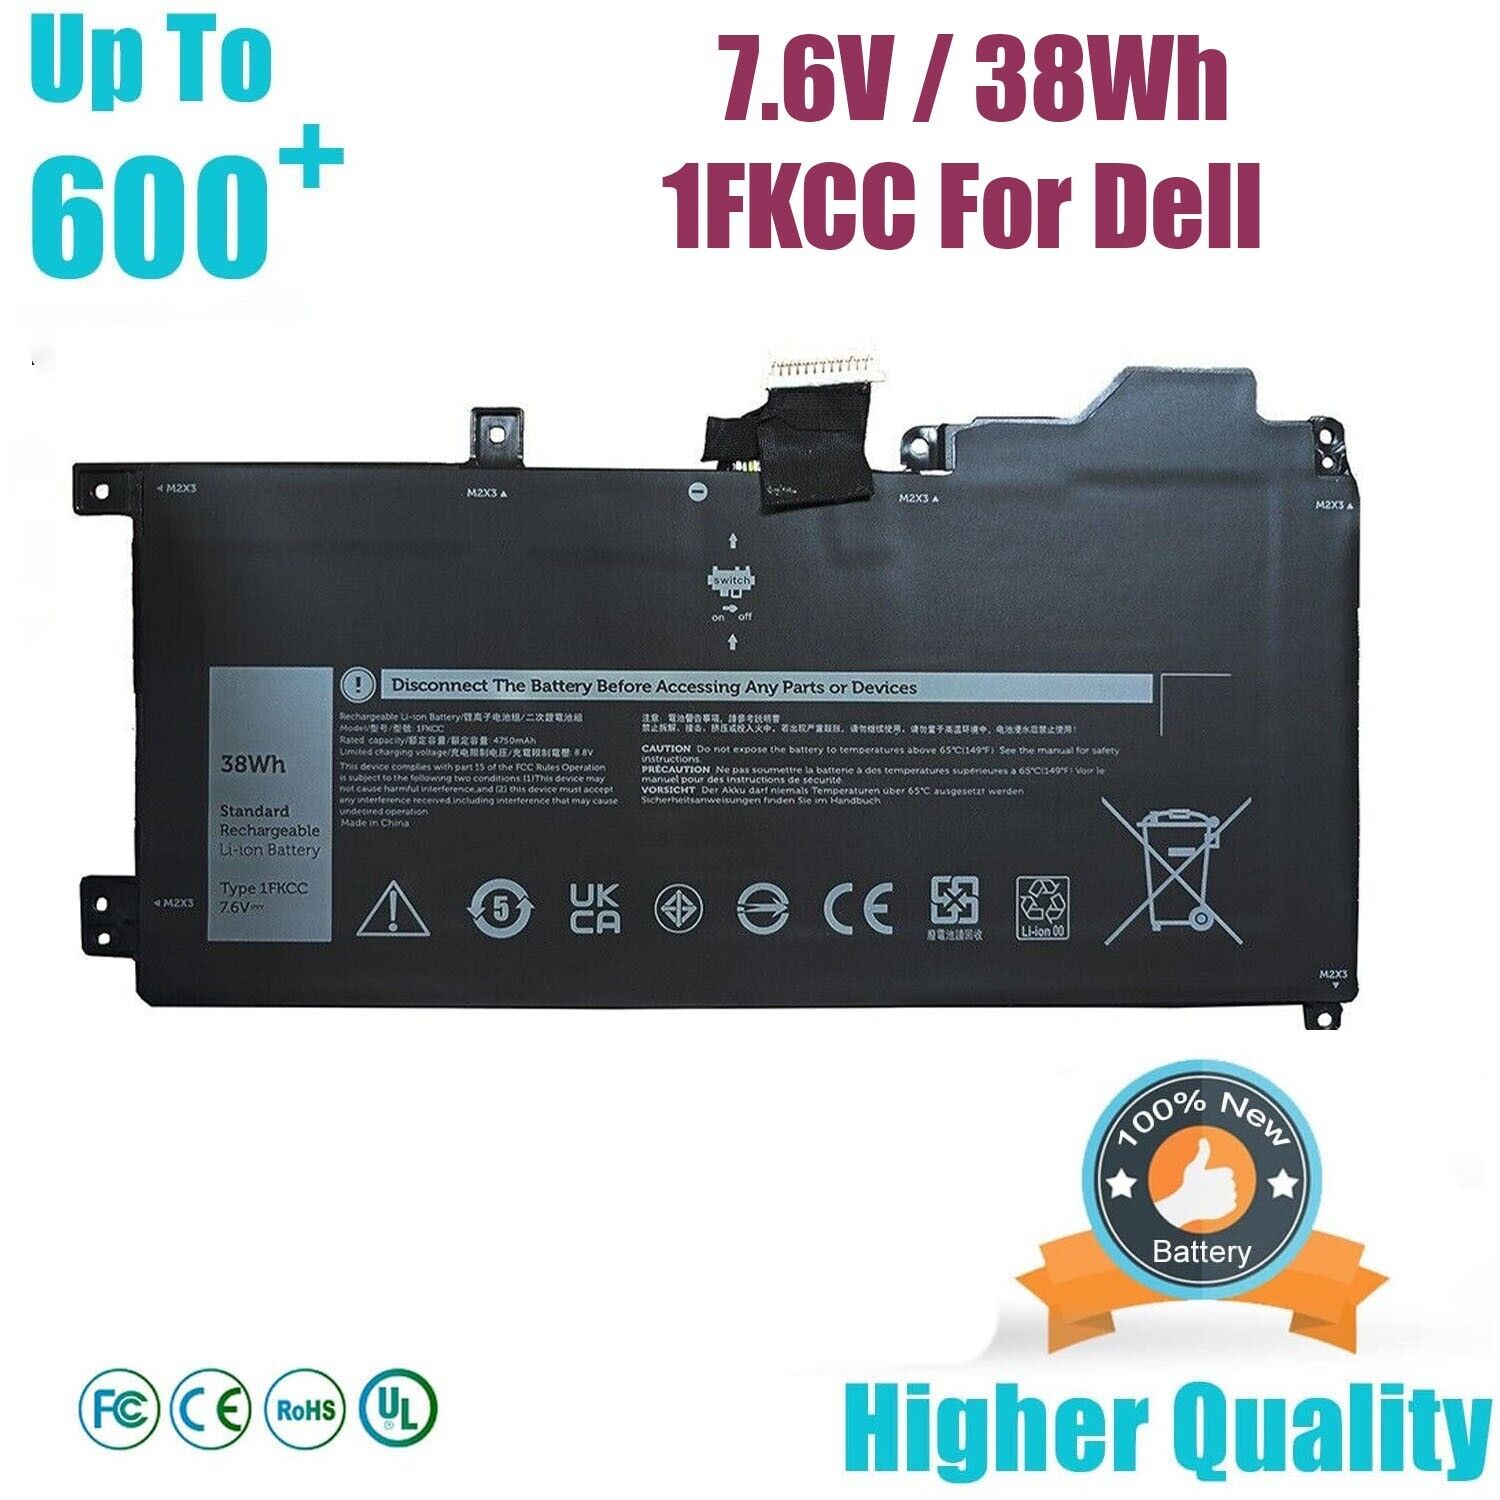 38Wh 1FKCC Battery for Dell Latitude 7200 7210 2-IN-1 KWWW4 D9J00 9NTKM New